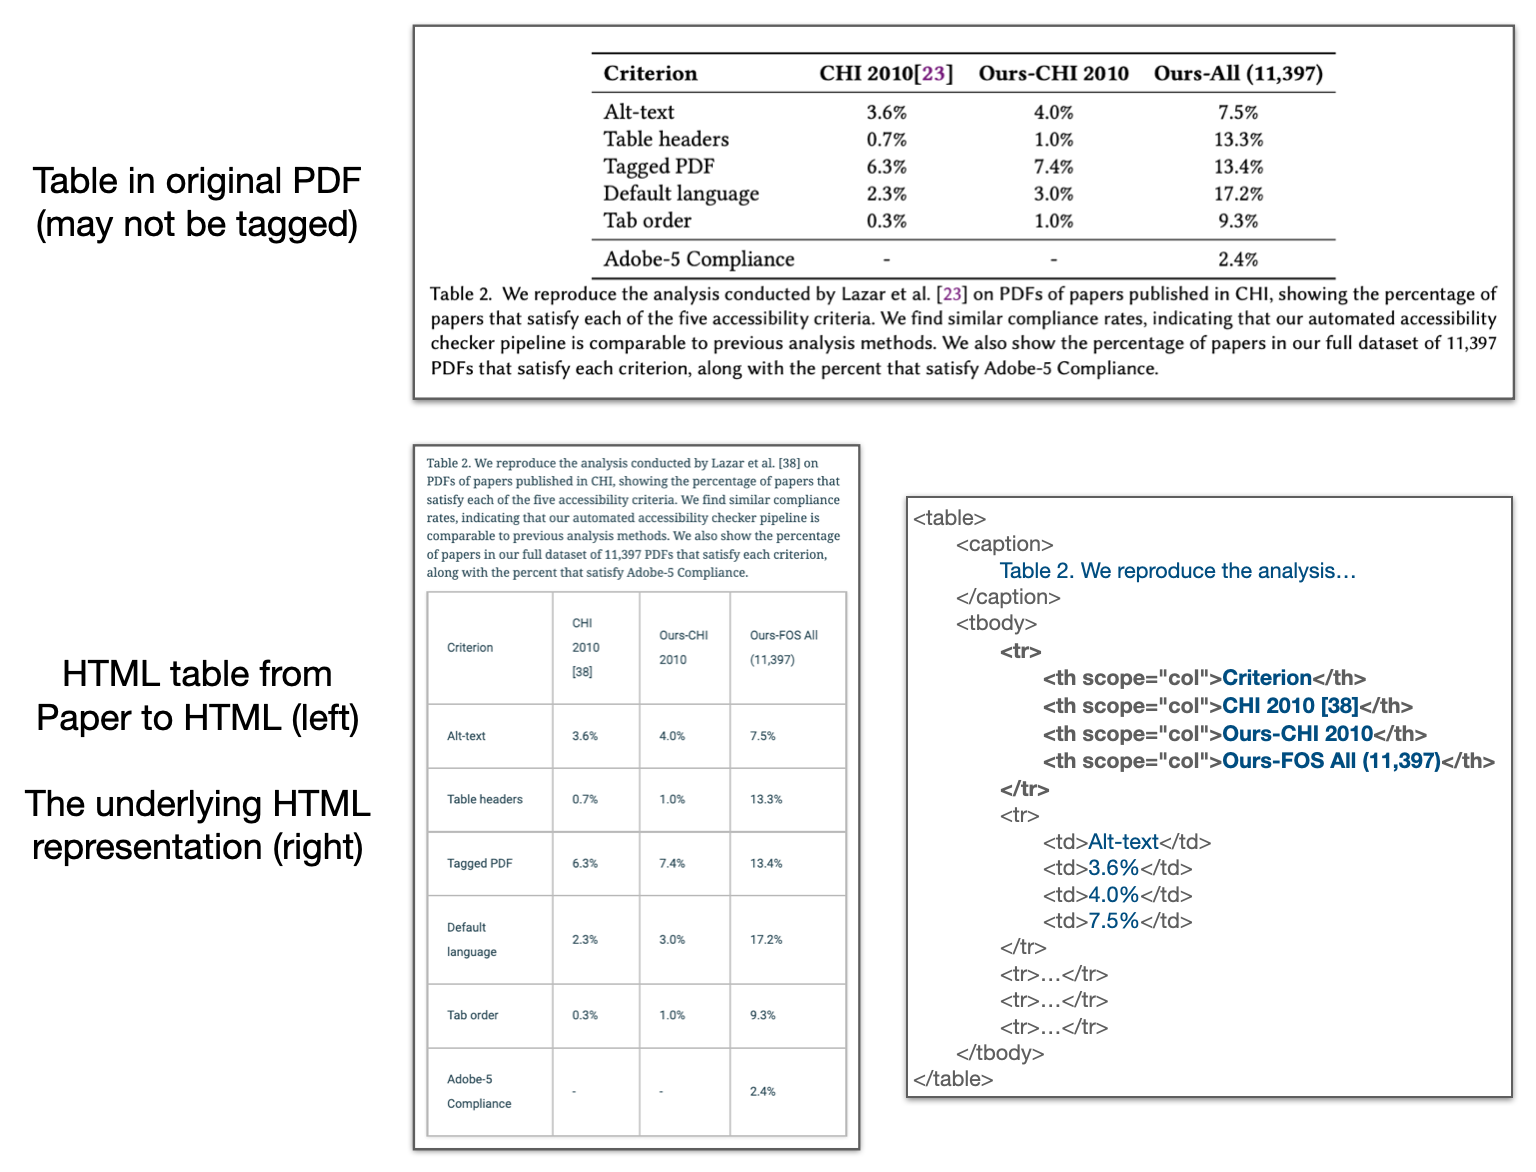 At the top, the figure shows a screenshot of Table 2 from the Wang et al. 2021a paper, which contains statistics on accessibility compliance from a sample of scientific paper PDFs. This region is labeled "Table in original PDF (may not be tagged)." At the bottom, the figure shows a screenshot of the same Table rendered in HTML by Paper to HTML, and the underlying HTML code representation for the table. The headers in the table are represented using <th> tags. This region is labeled "HTML table from Paper to HTML (left); The underlying HTML representation (right)."